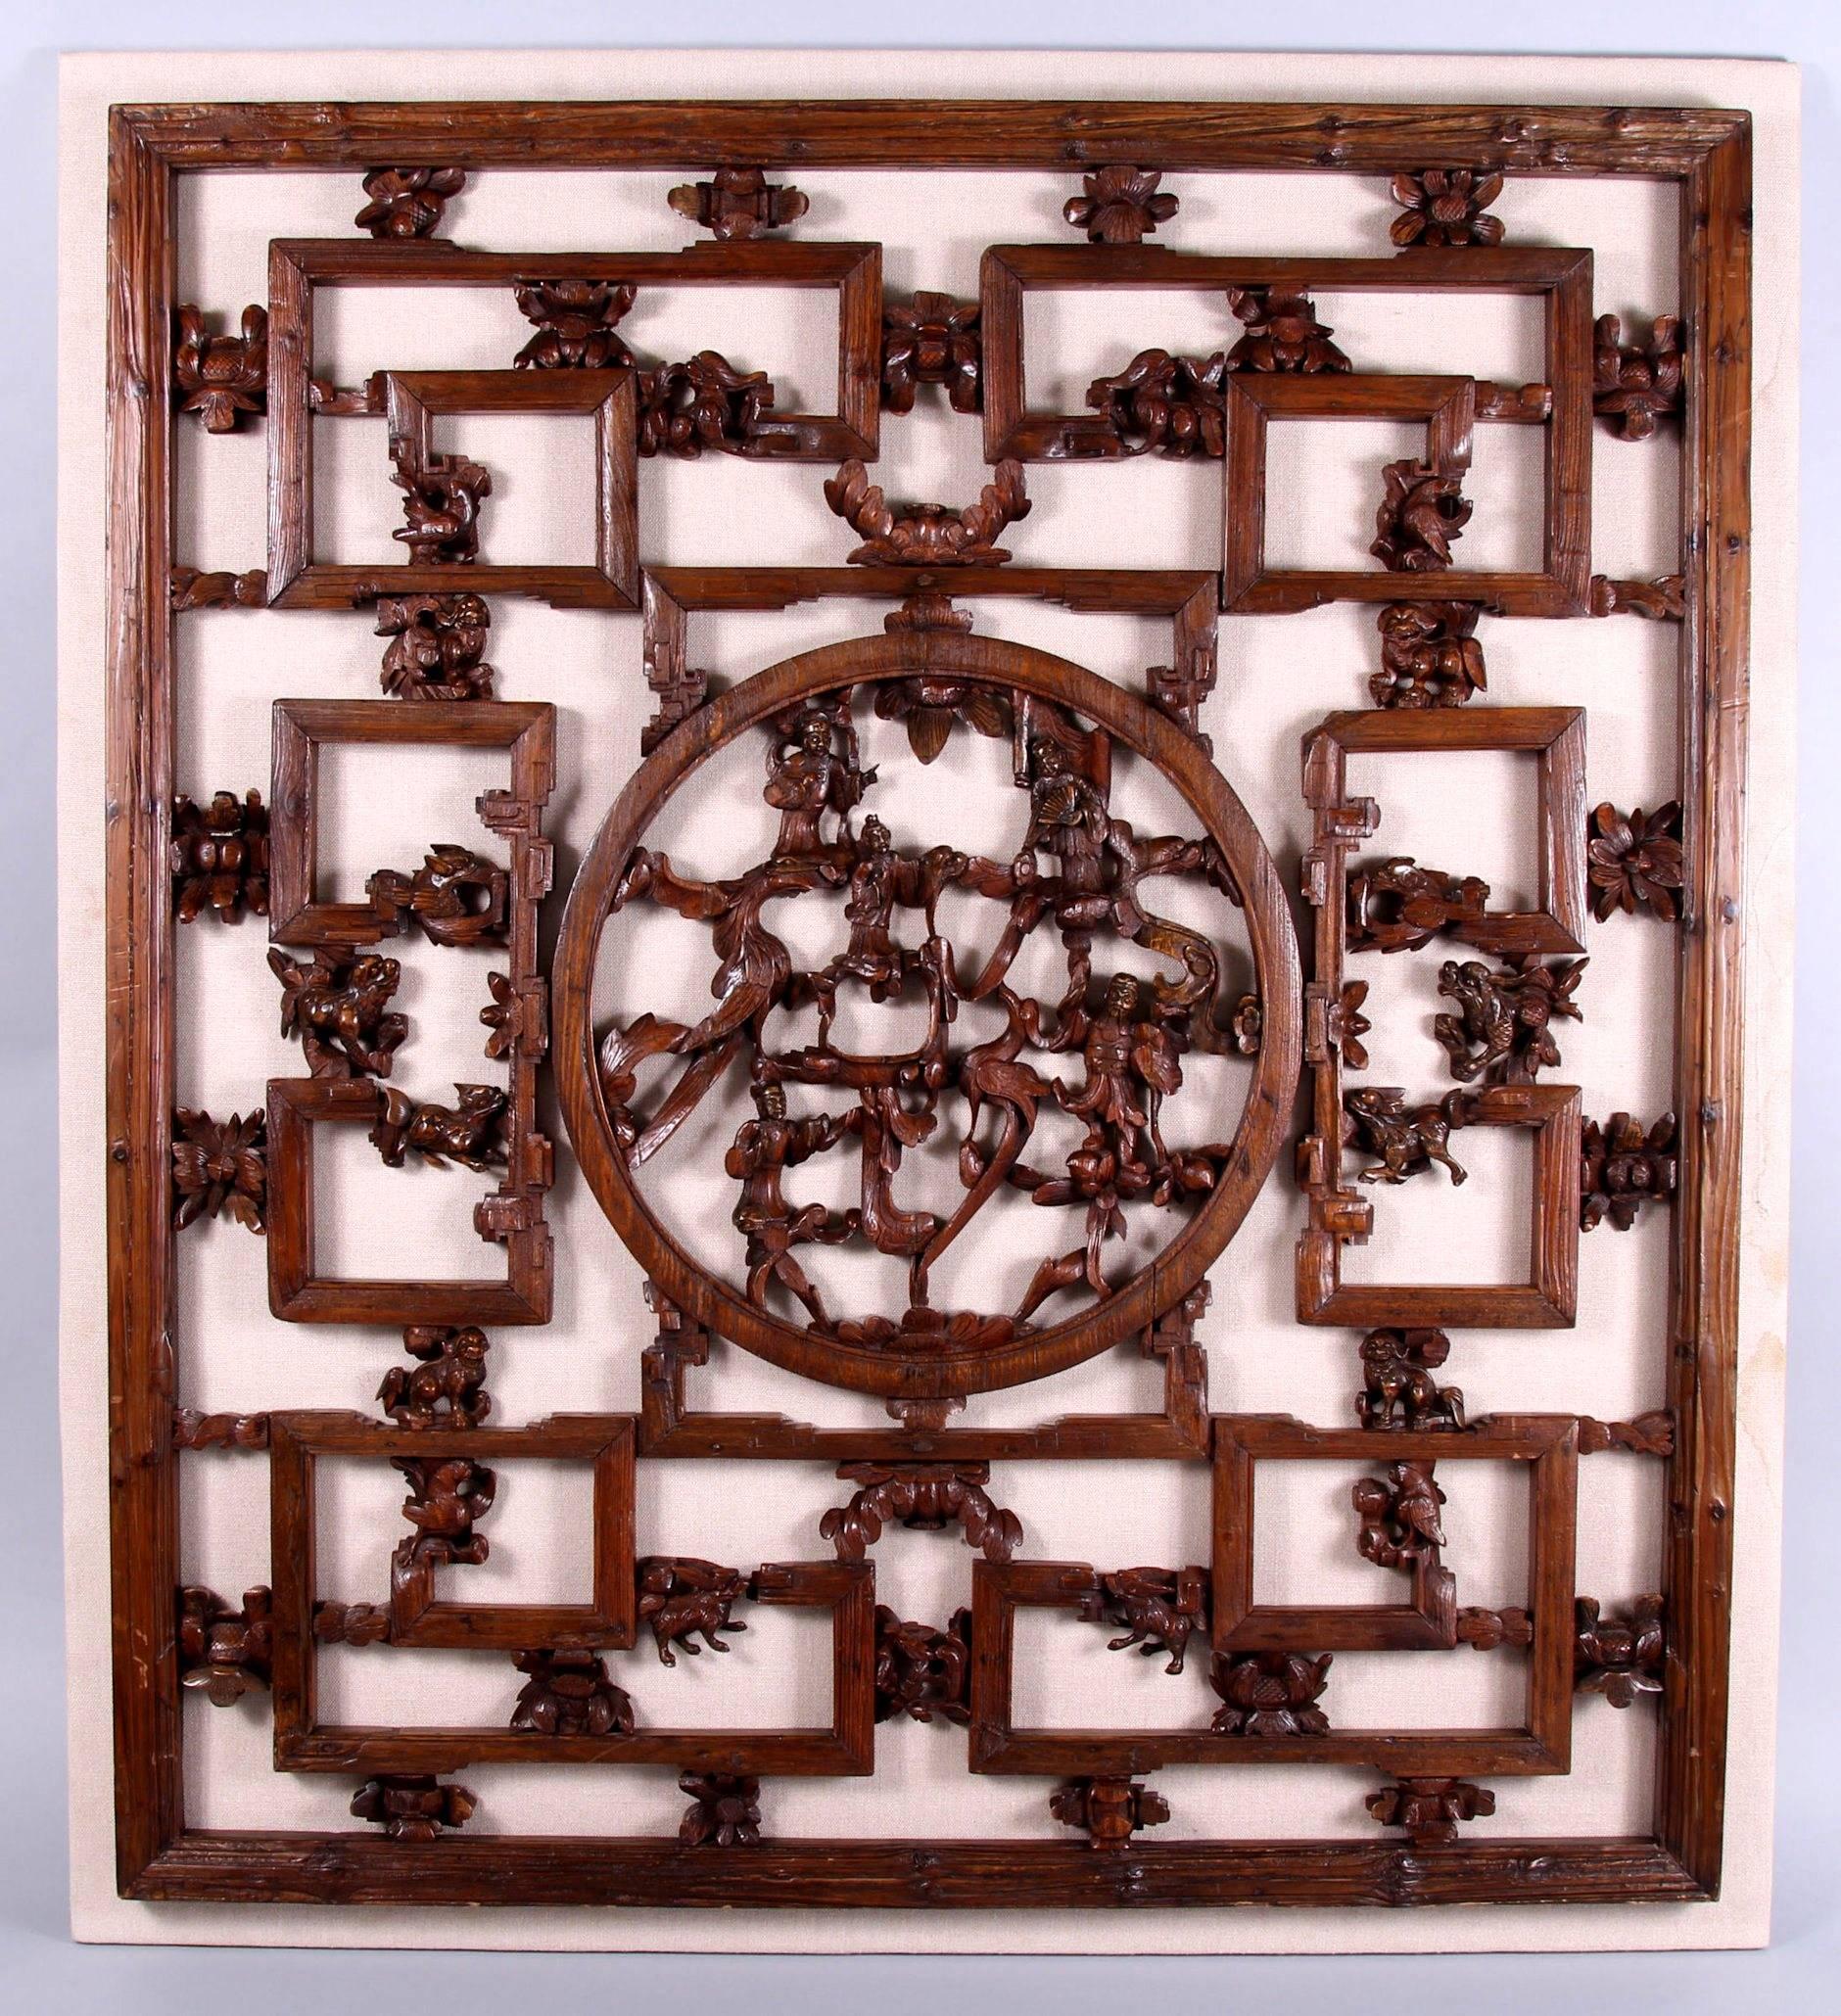 Magnificent and grand 18th century Chinese lattice panel, Qianlong period. The impressive size, carving, attention to detail and quality of this piece are absolutely superb. When you look in close inspection, you will see the most beautiful figural